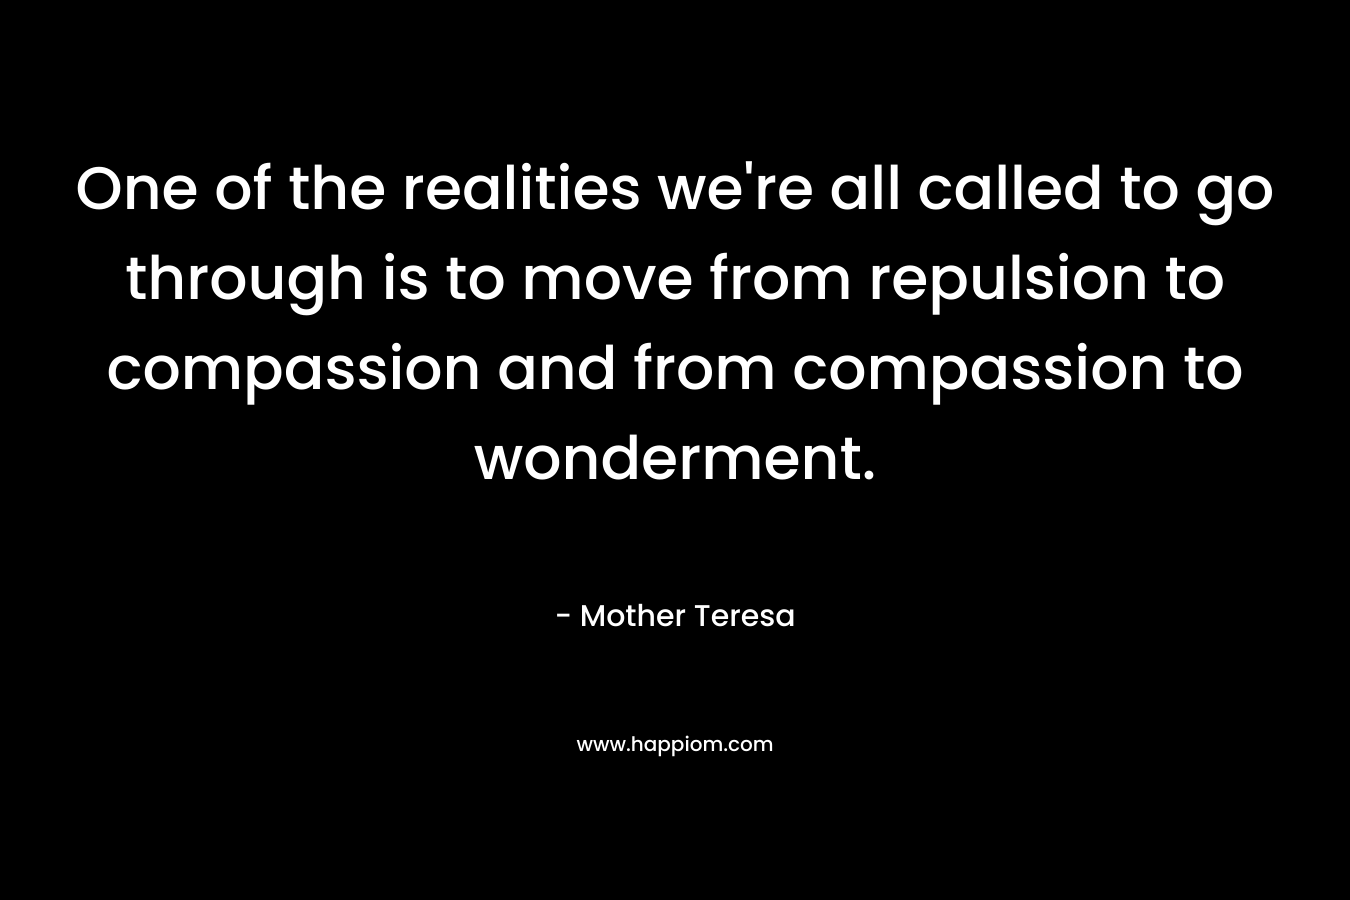 One of the realities we’re all called to go through is to move from repulsion to compassion and from compassion to wonderment. – Mother Teresa